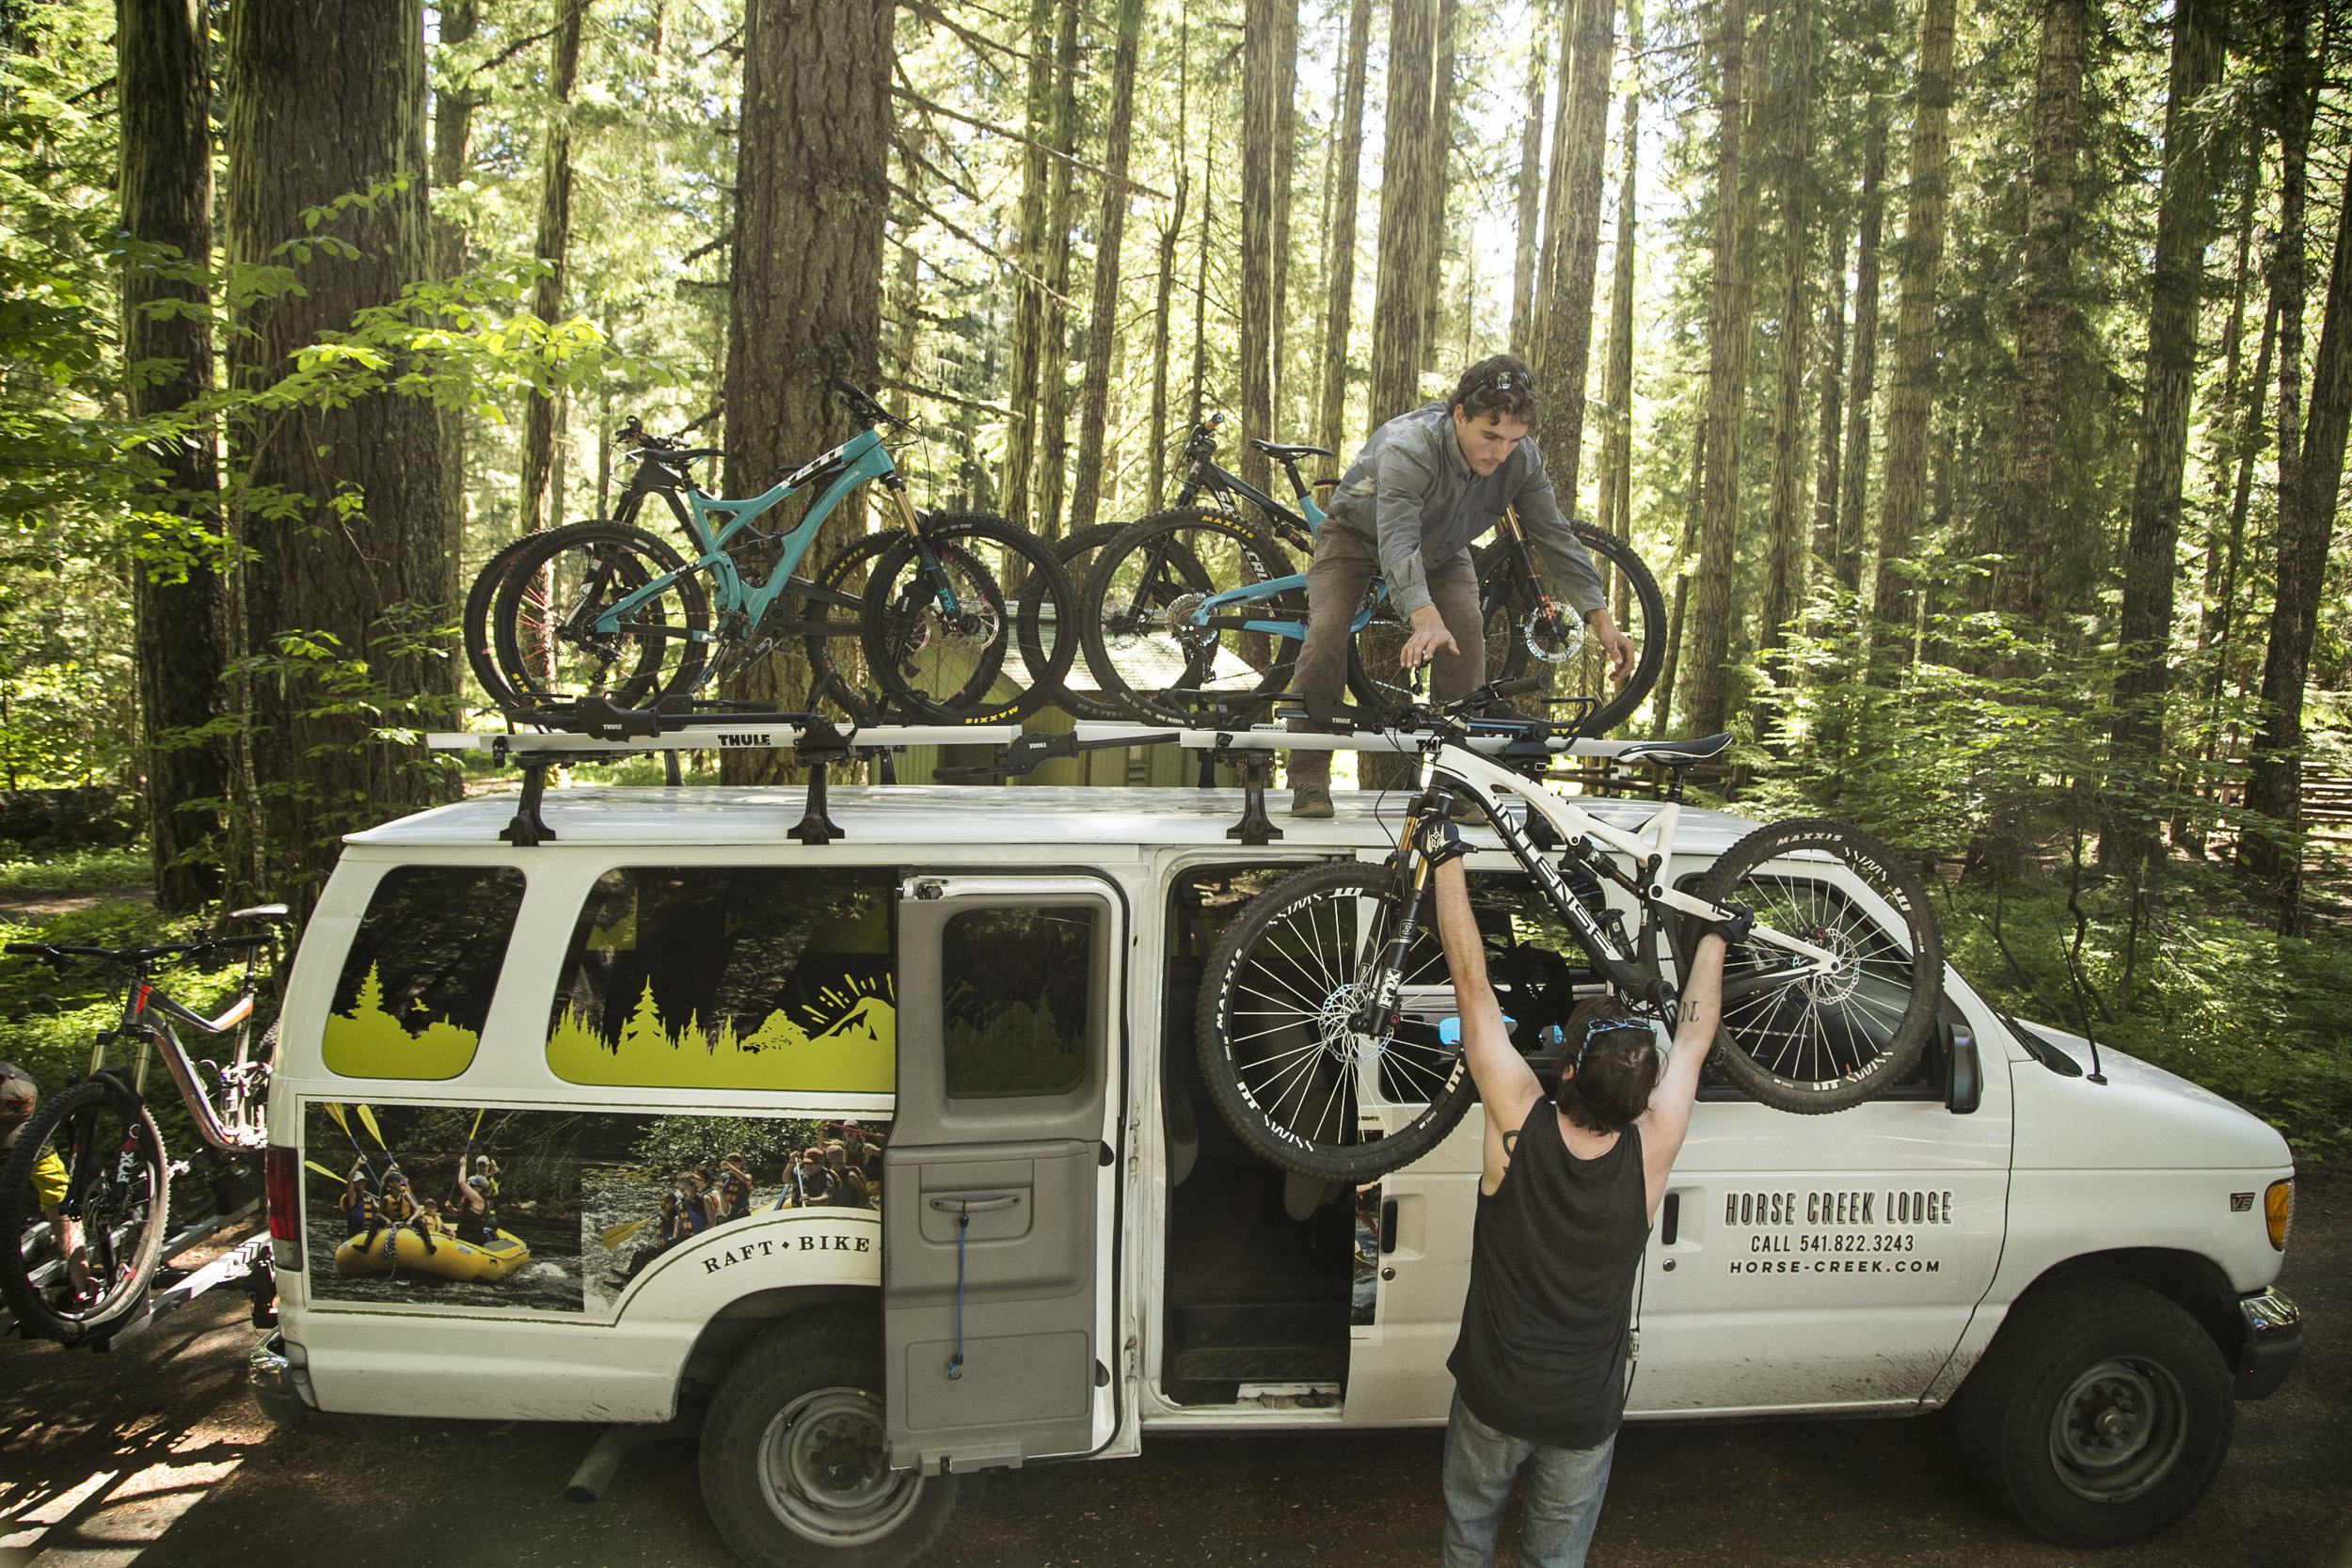  A special thank you to Horse Creek Lodge for their generosity in getting us around the forest with our bikes and gear. 